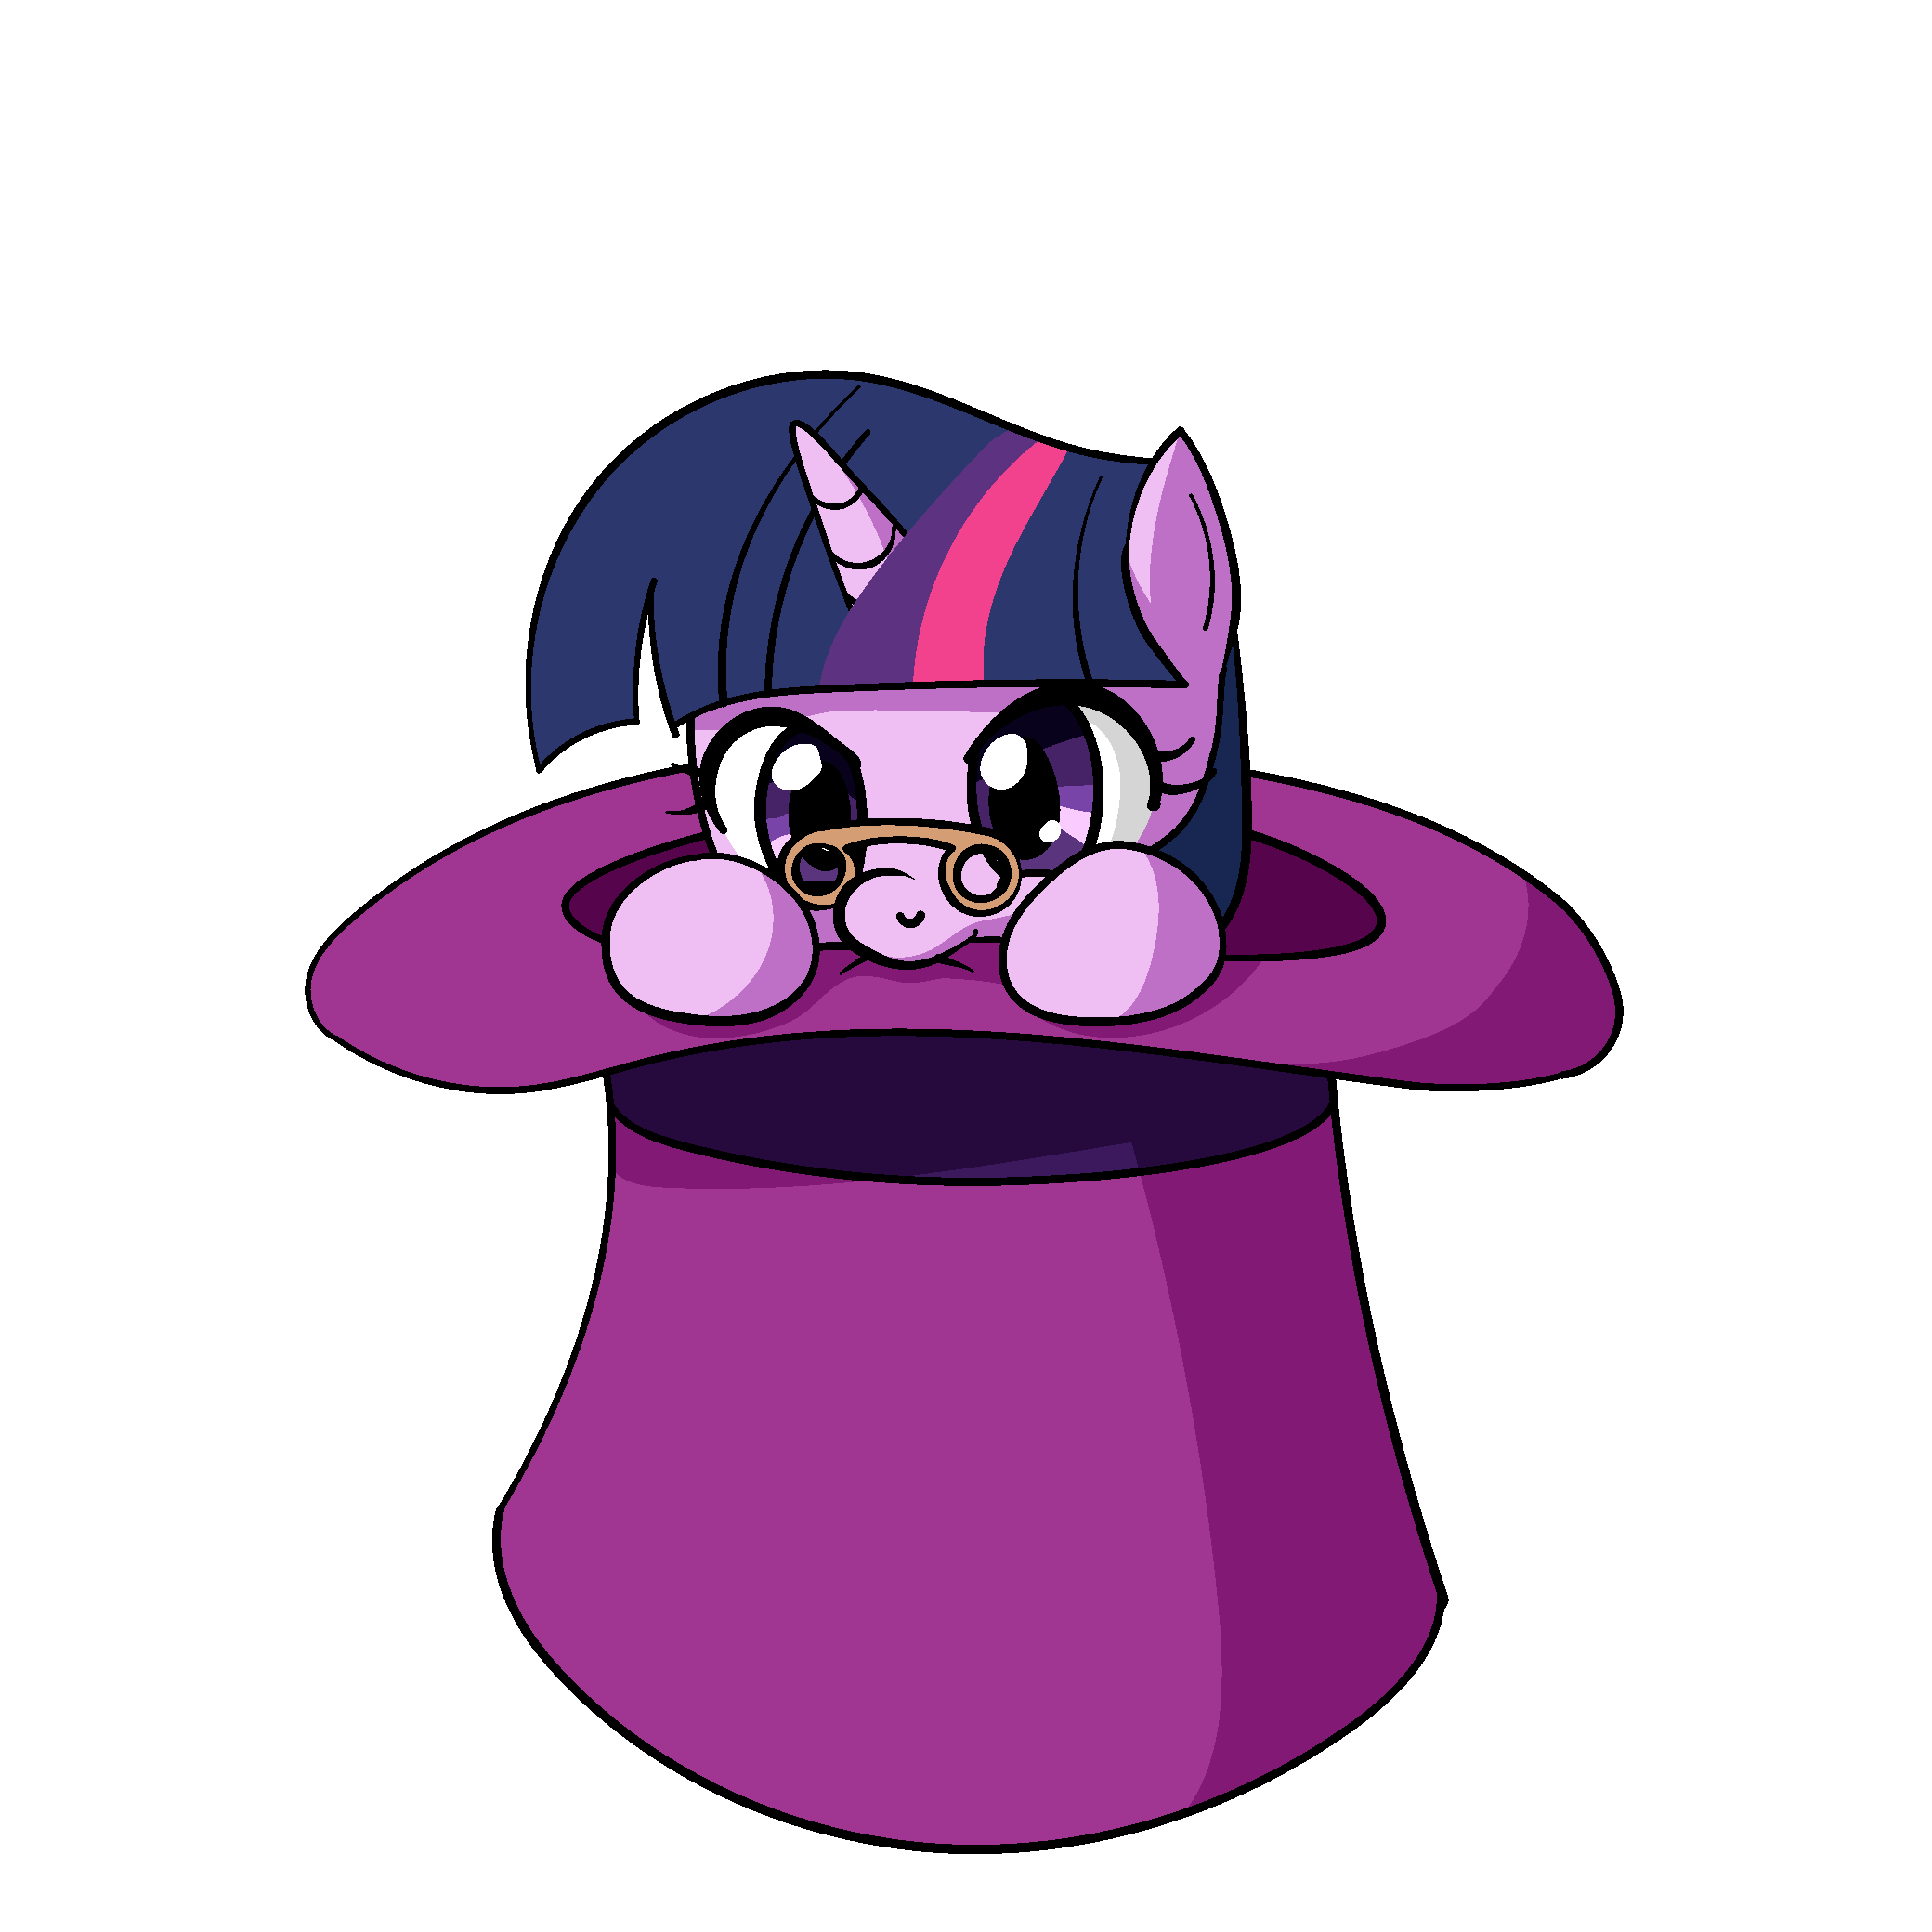 Twilight in a top hat by FantasyBlade